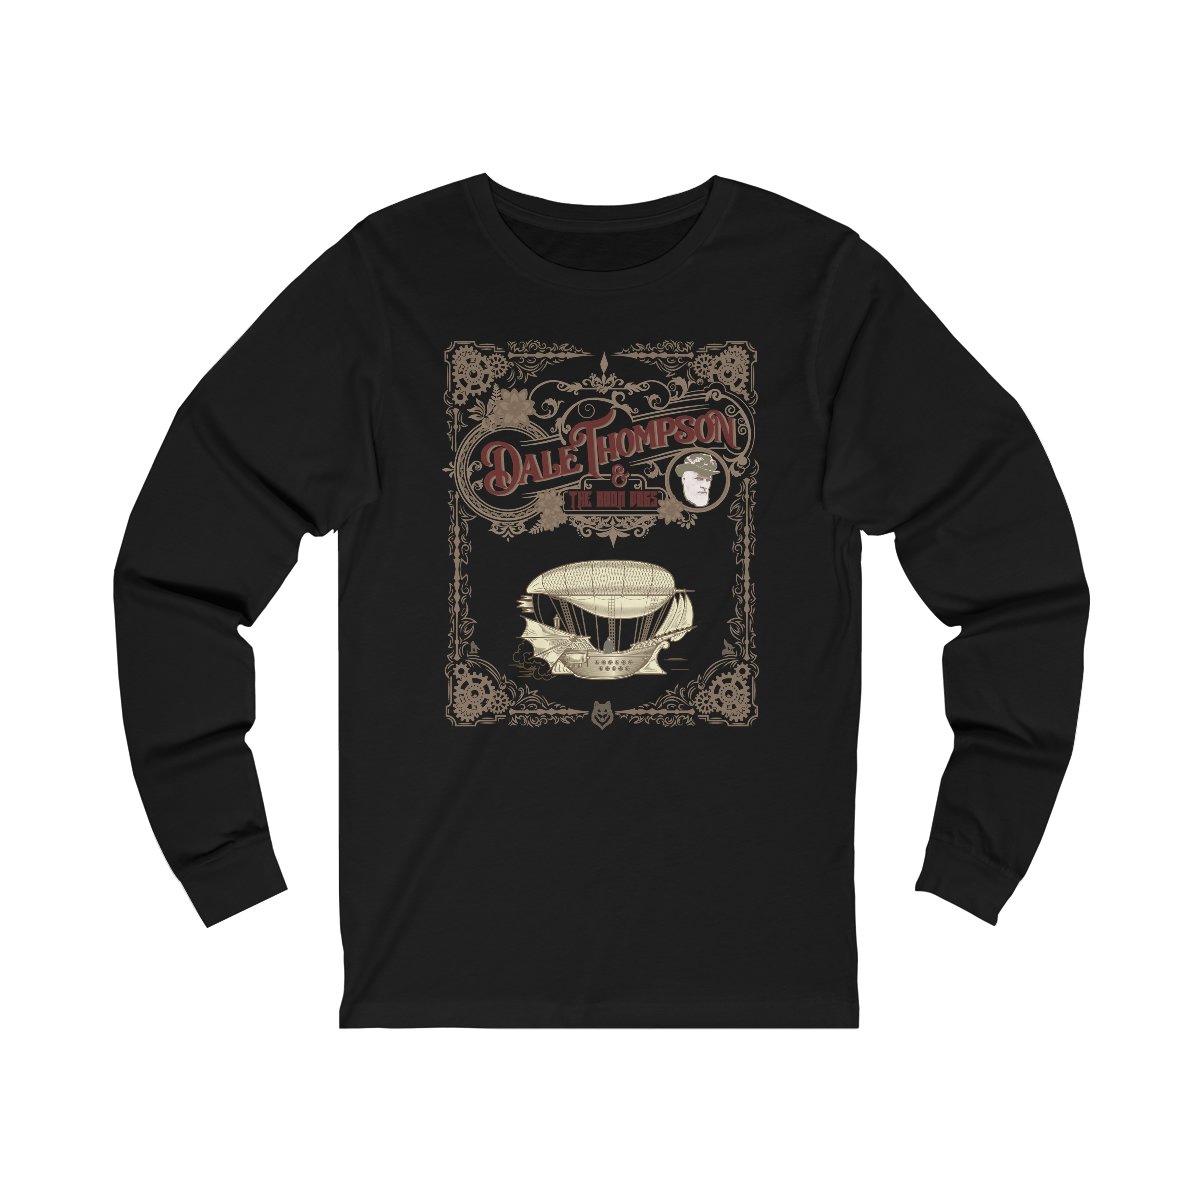 Dale Thompson and The Boon Dogs Long Sleeve Tshirt 3501